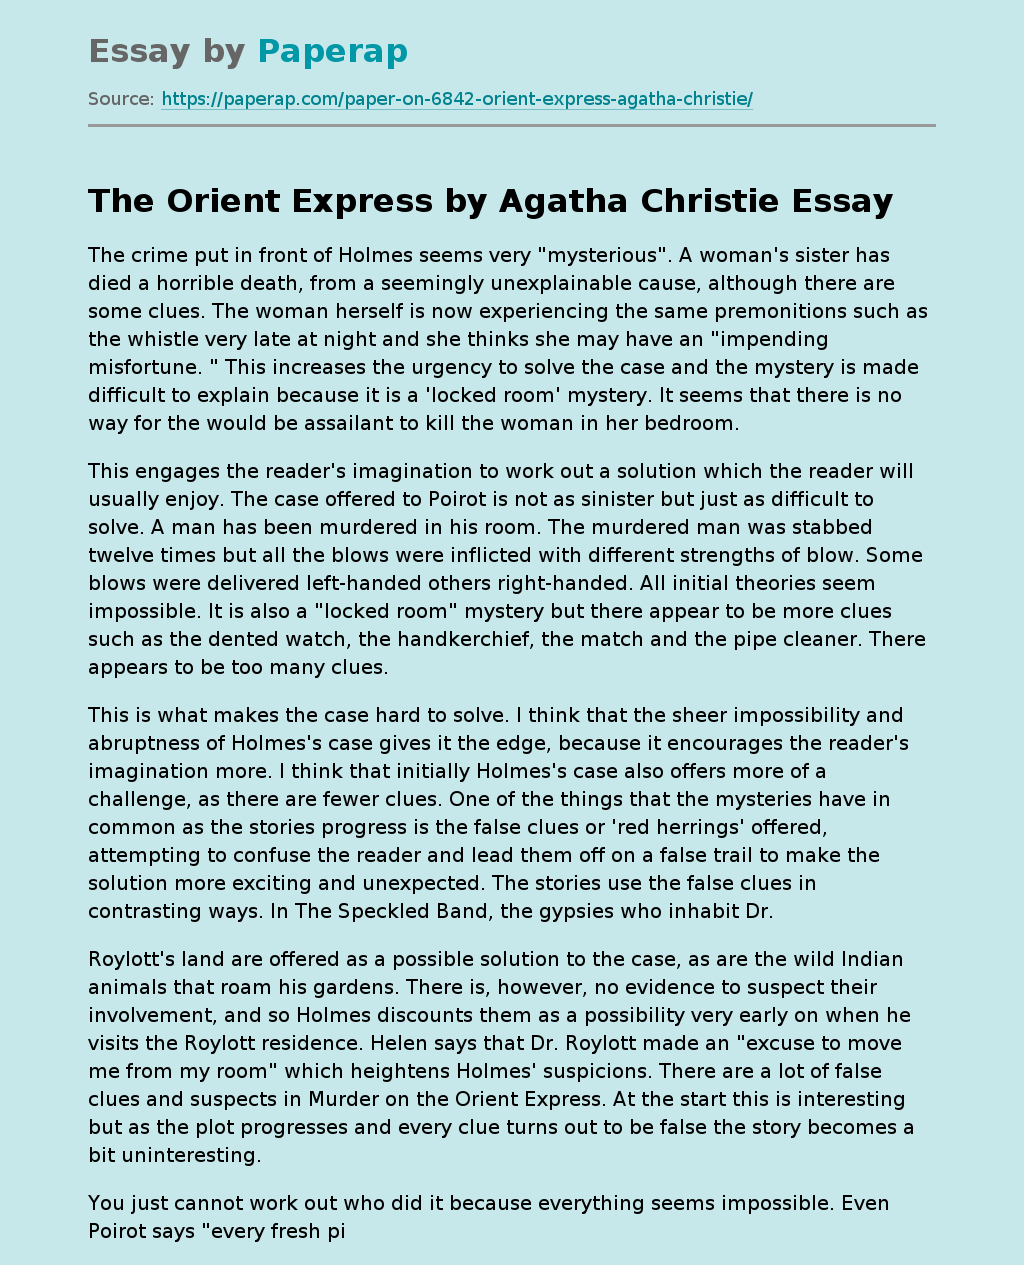 The Orient Express by Agatha Christie